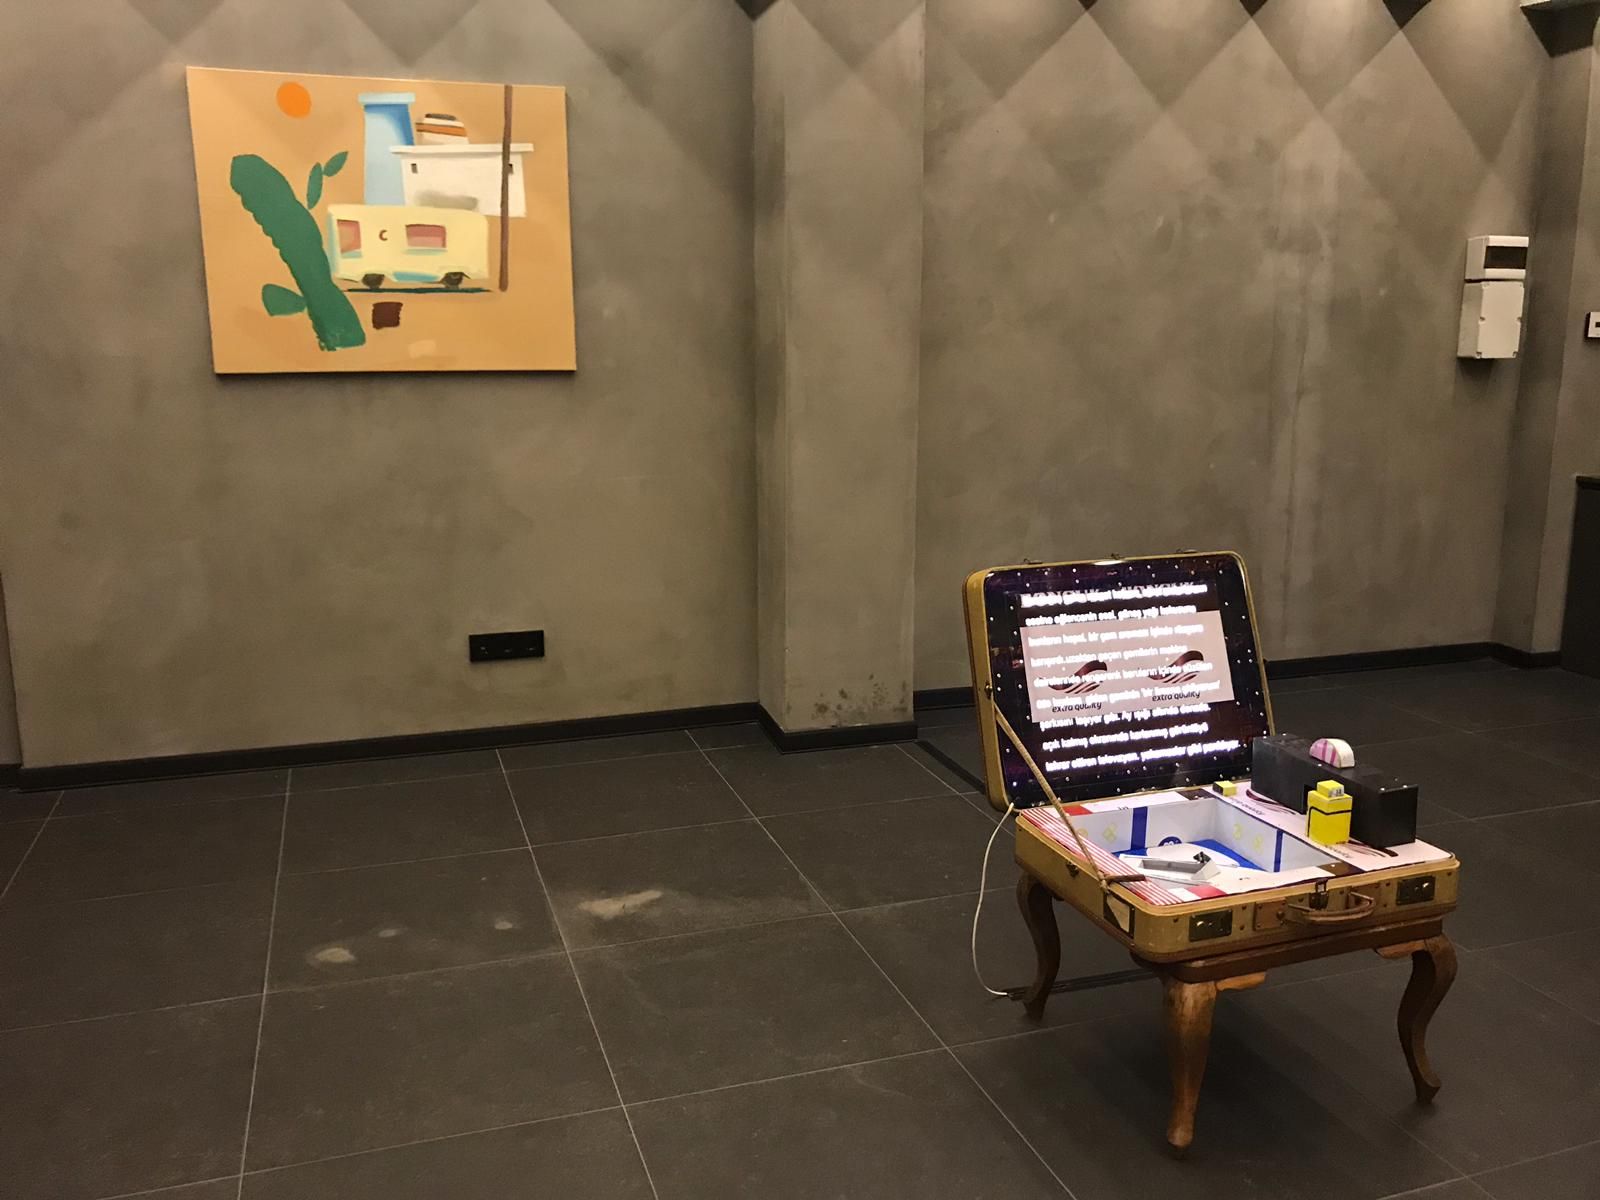 26/06/2019 - Antonio Cosentino participating in the exhibition ‘The First Marriage’ at Riverrun, Istanbul